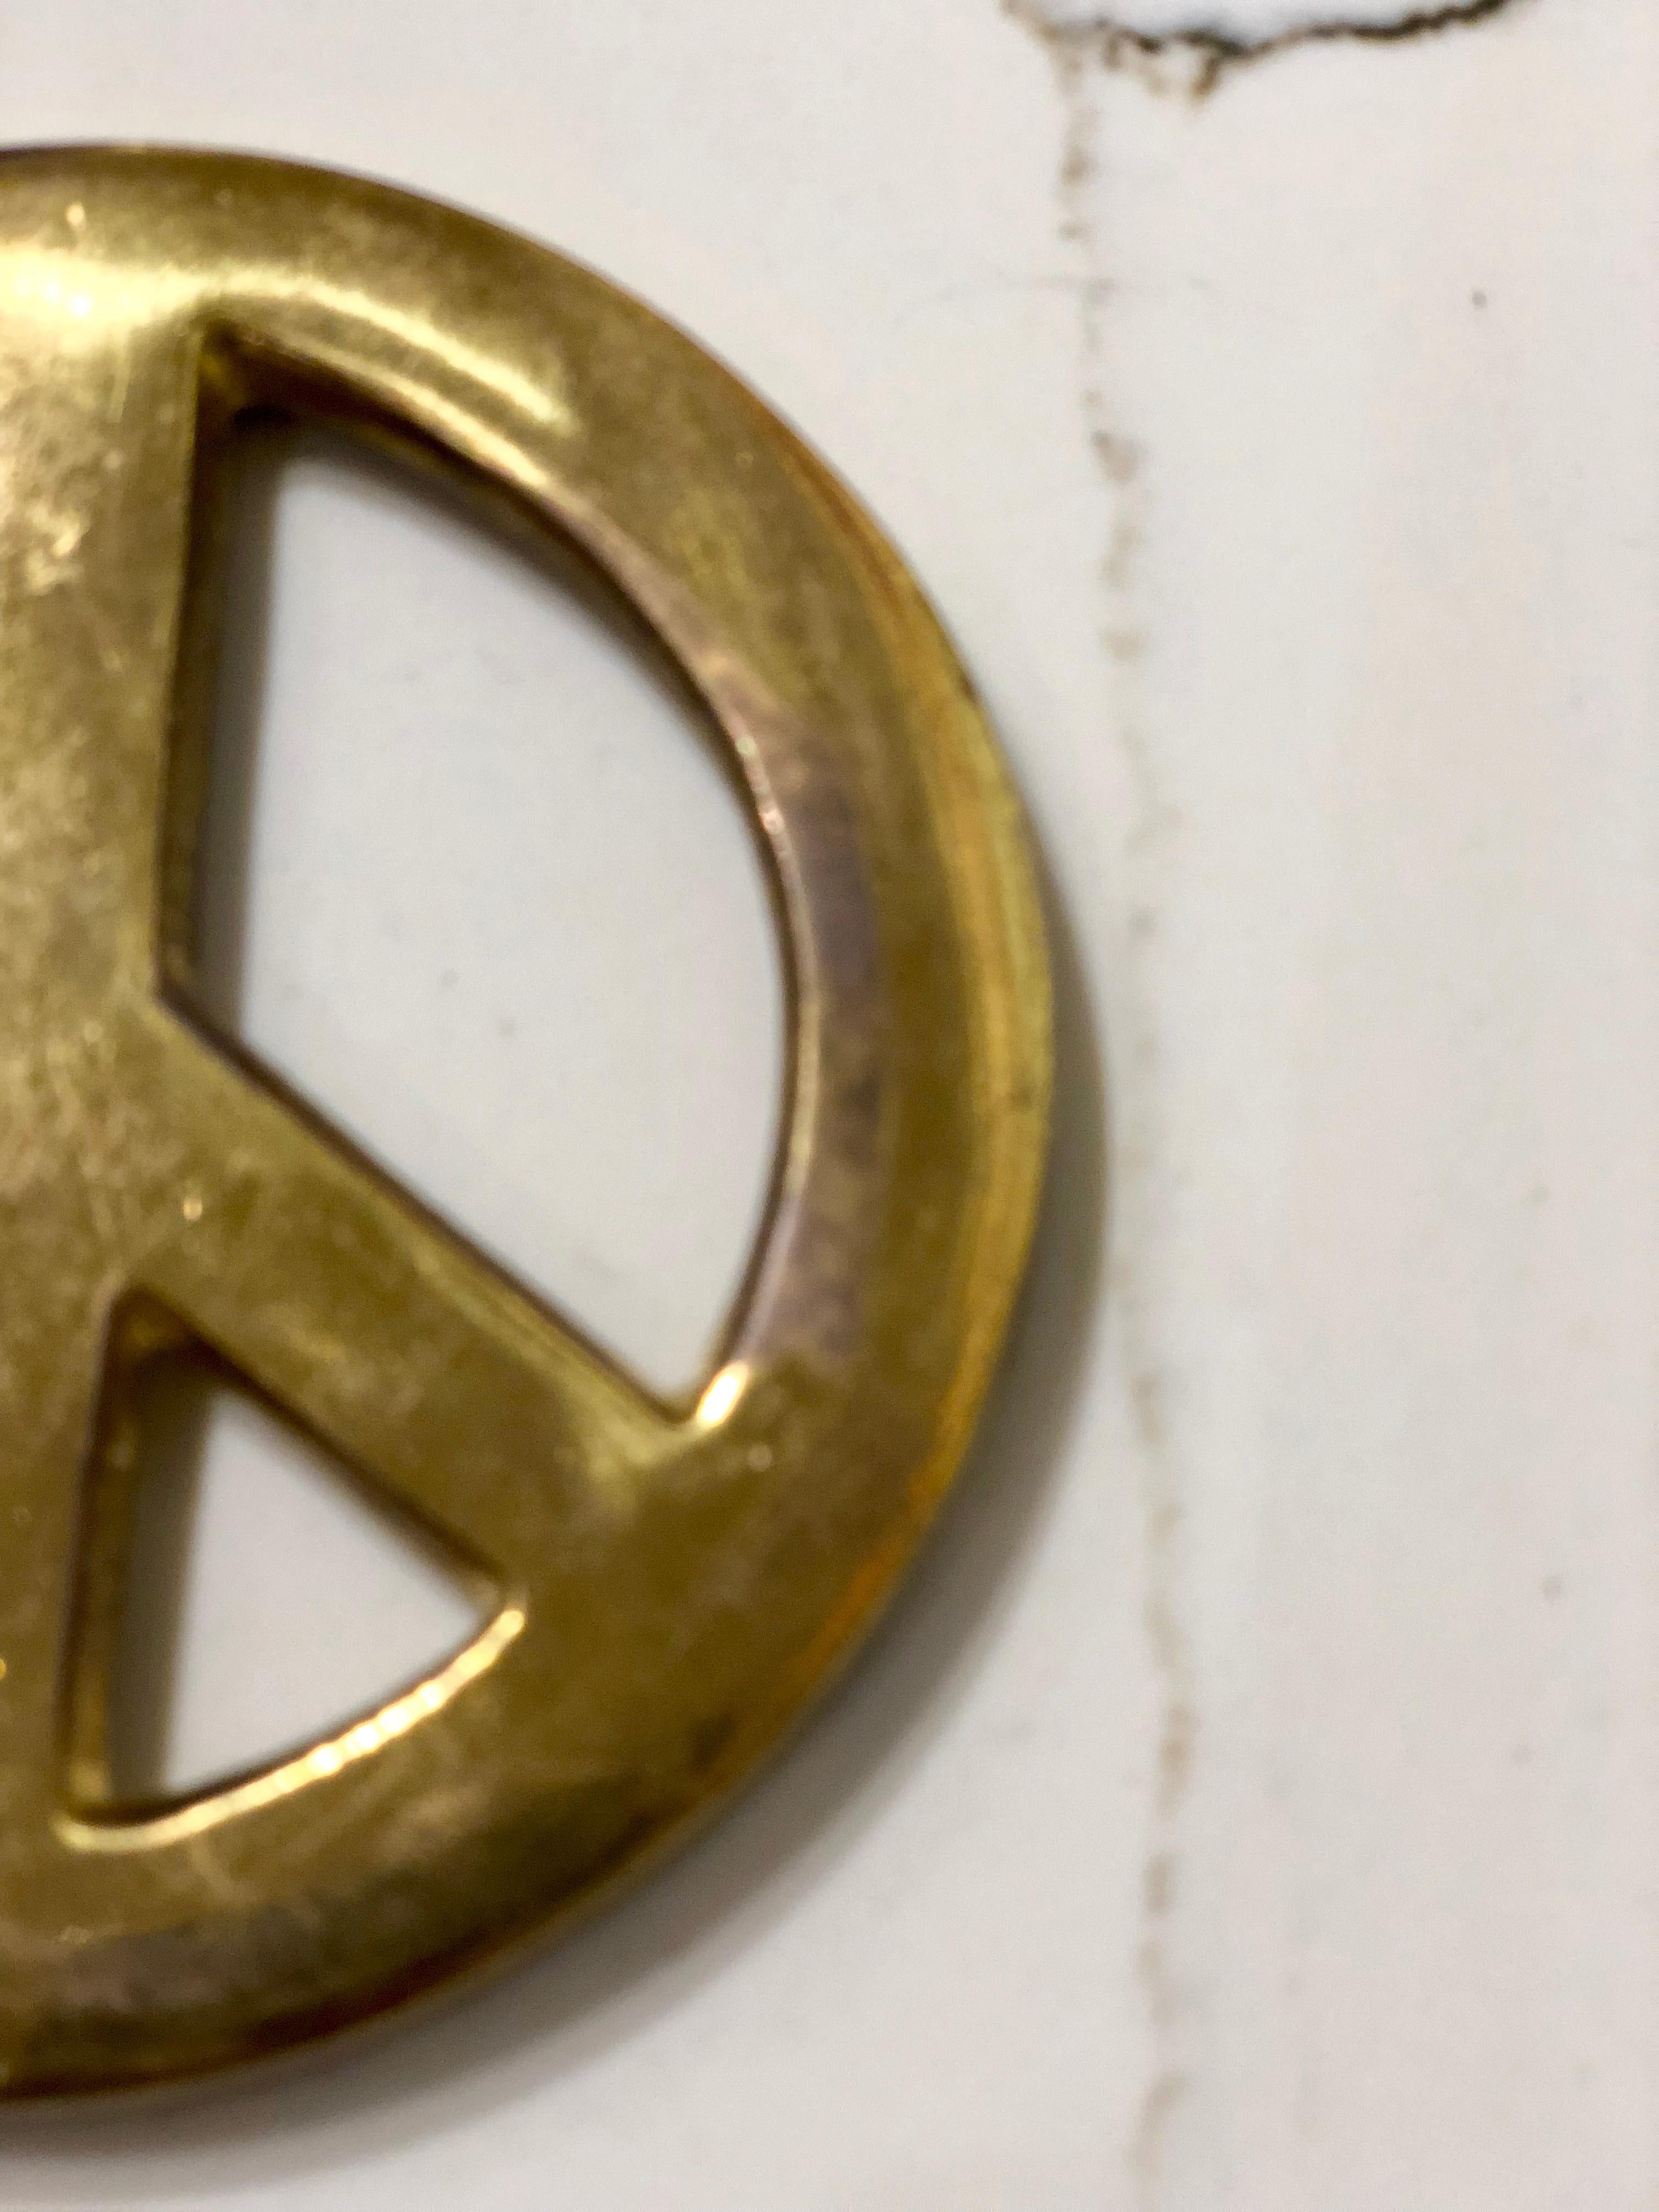 1970s solid patinated brass vintage peace sign, cool sign that can be hanged on the wall or display on top of a coffee table or a paperweight.